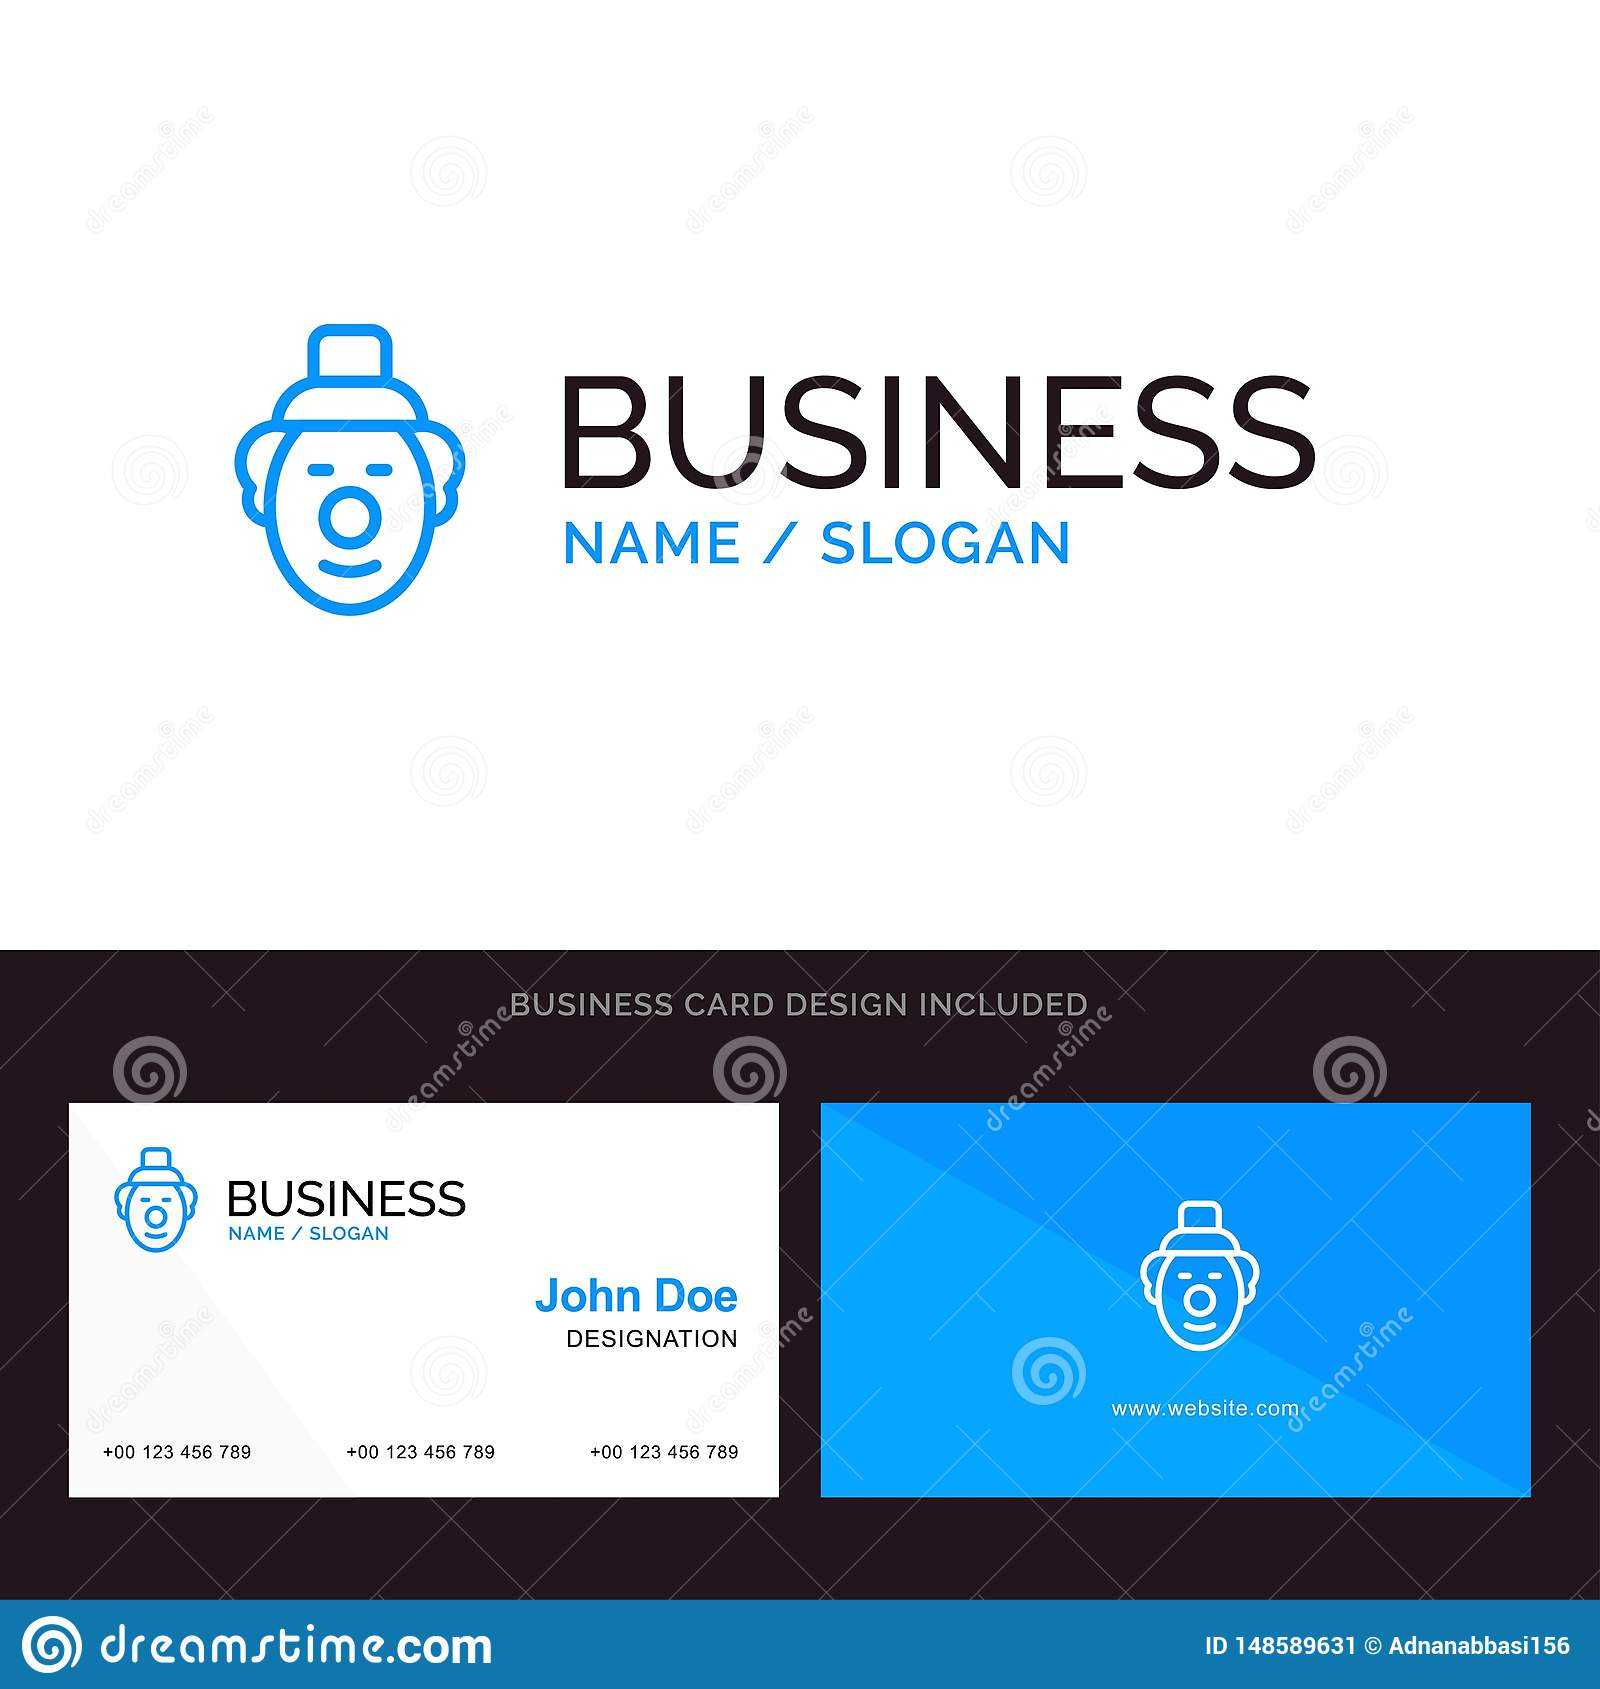 Logo And Business Card Template For Joker, Clown, Circus For Joker Card Template